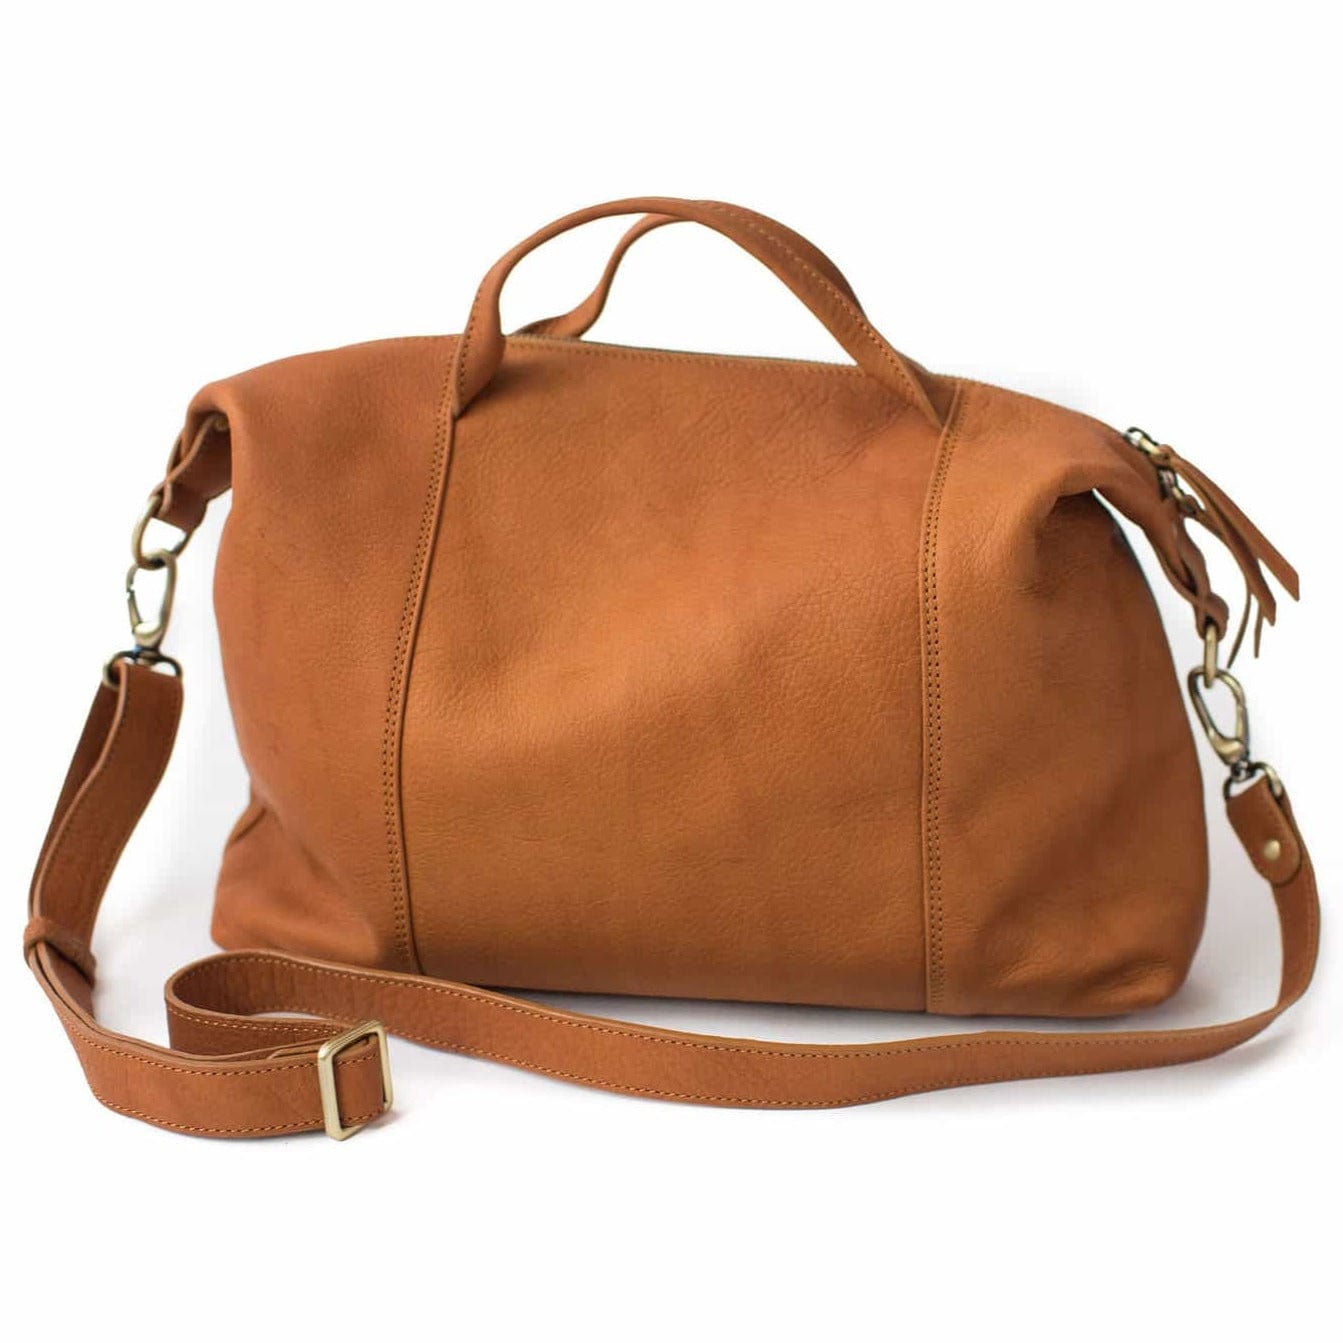 The back of the Linda Jean handbag in whisky tan raw leather has clean lines. Removable, adjustable strap.